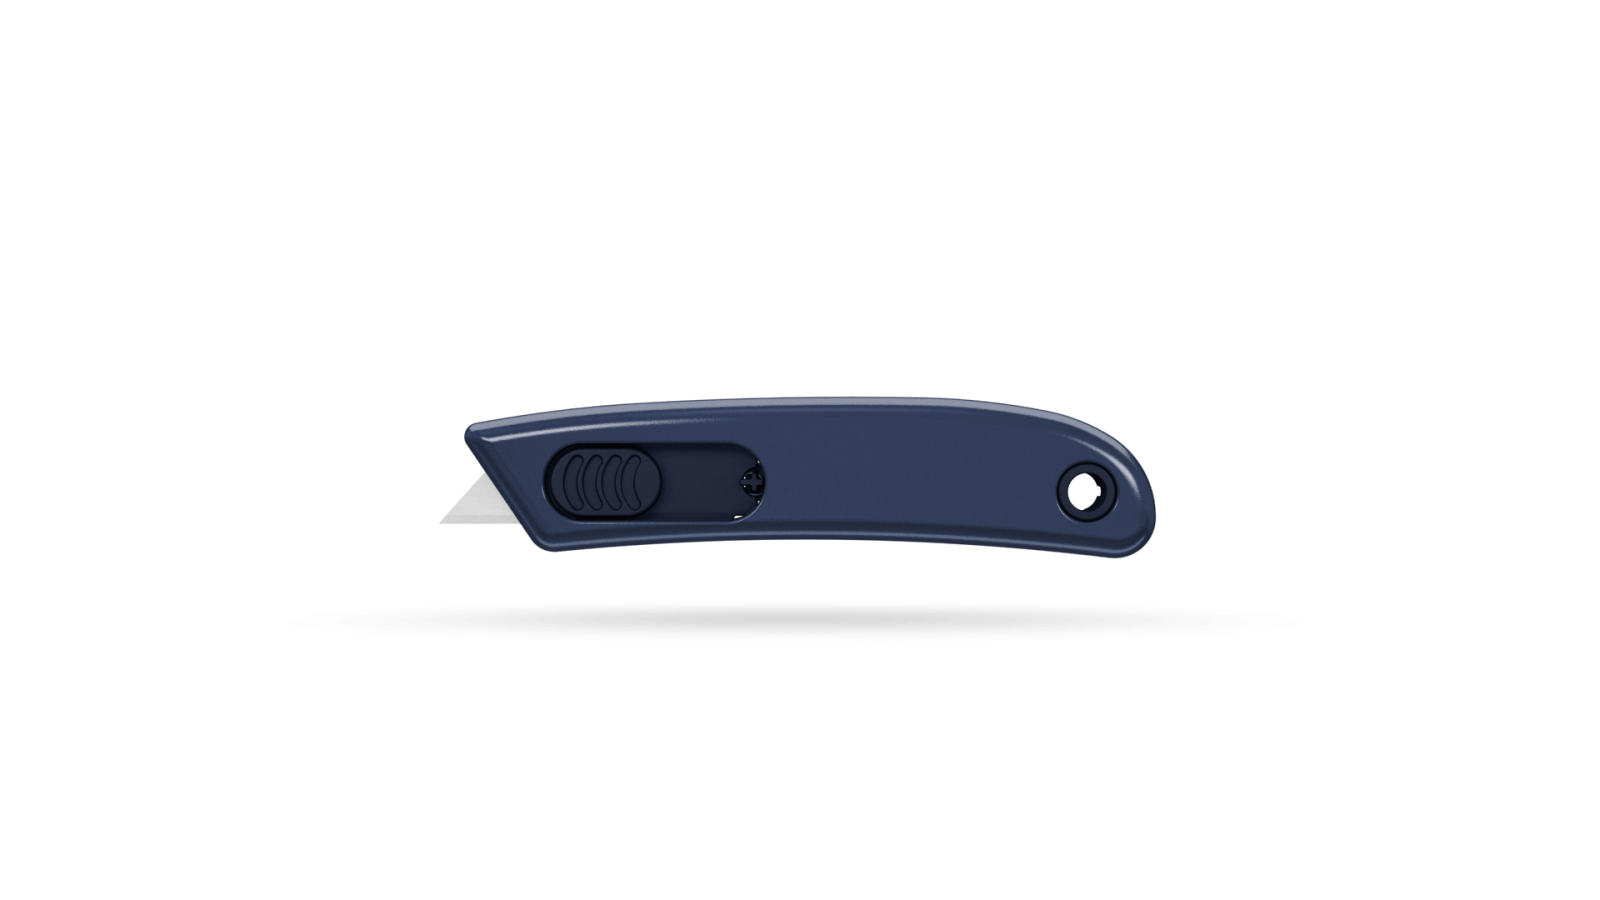 pics/Martor/Martor/martor-110700-secunorm-smartcut-safety-knife-for-the-food-industry.png